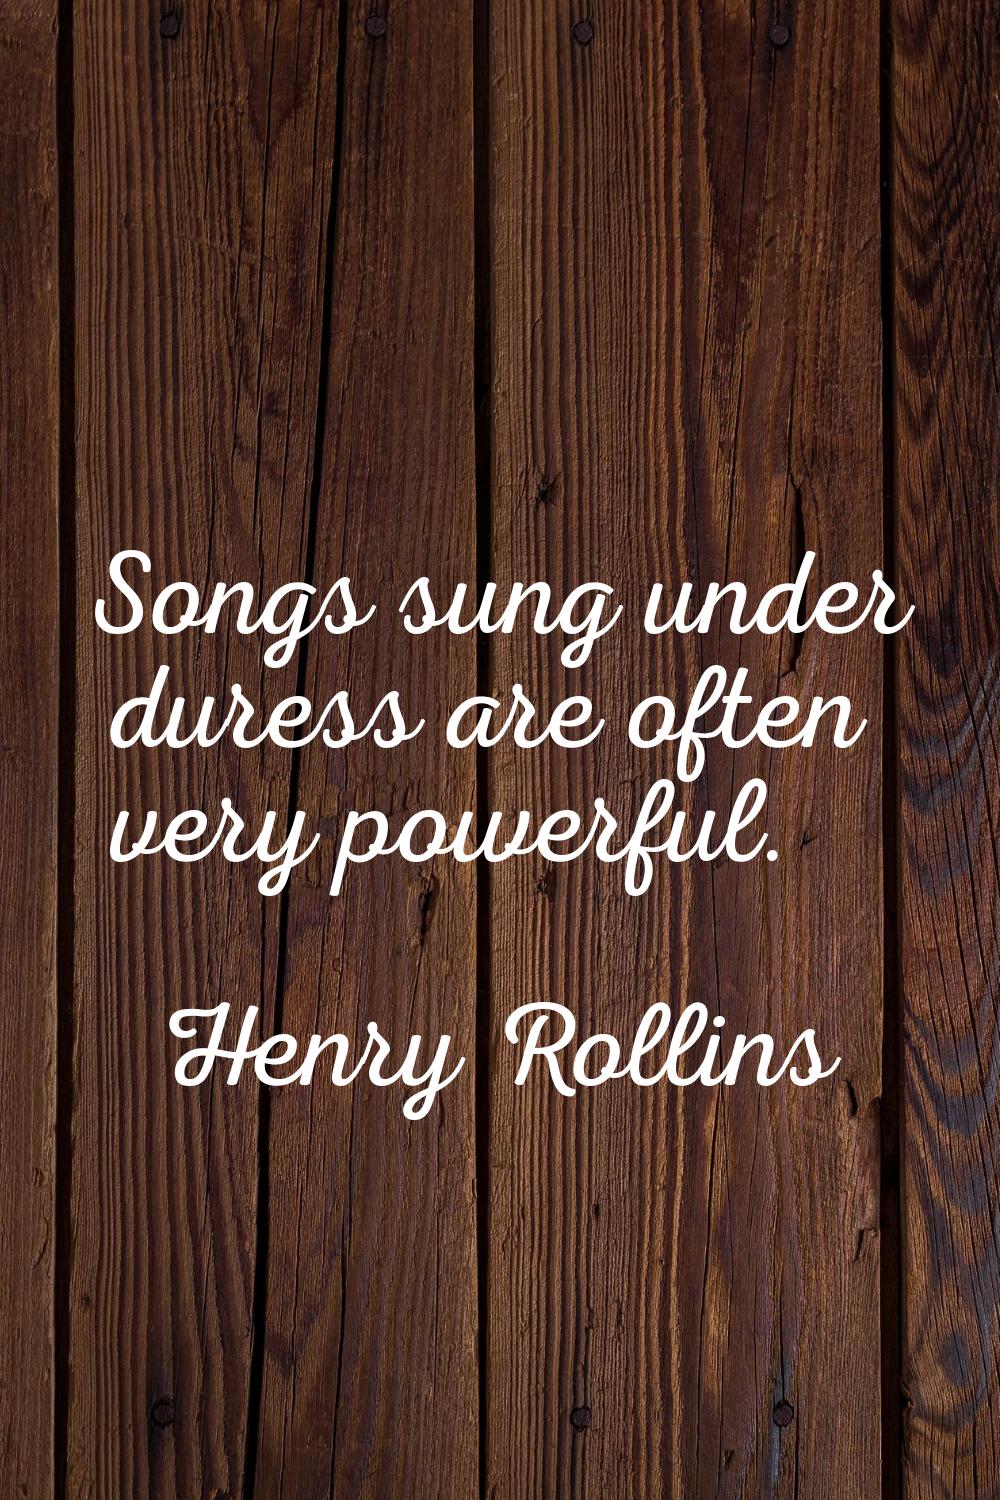 Songs sung under duress are often very powerful.